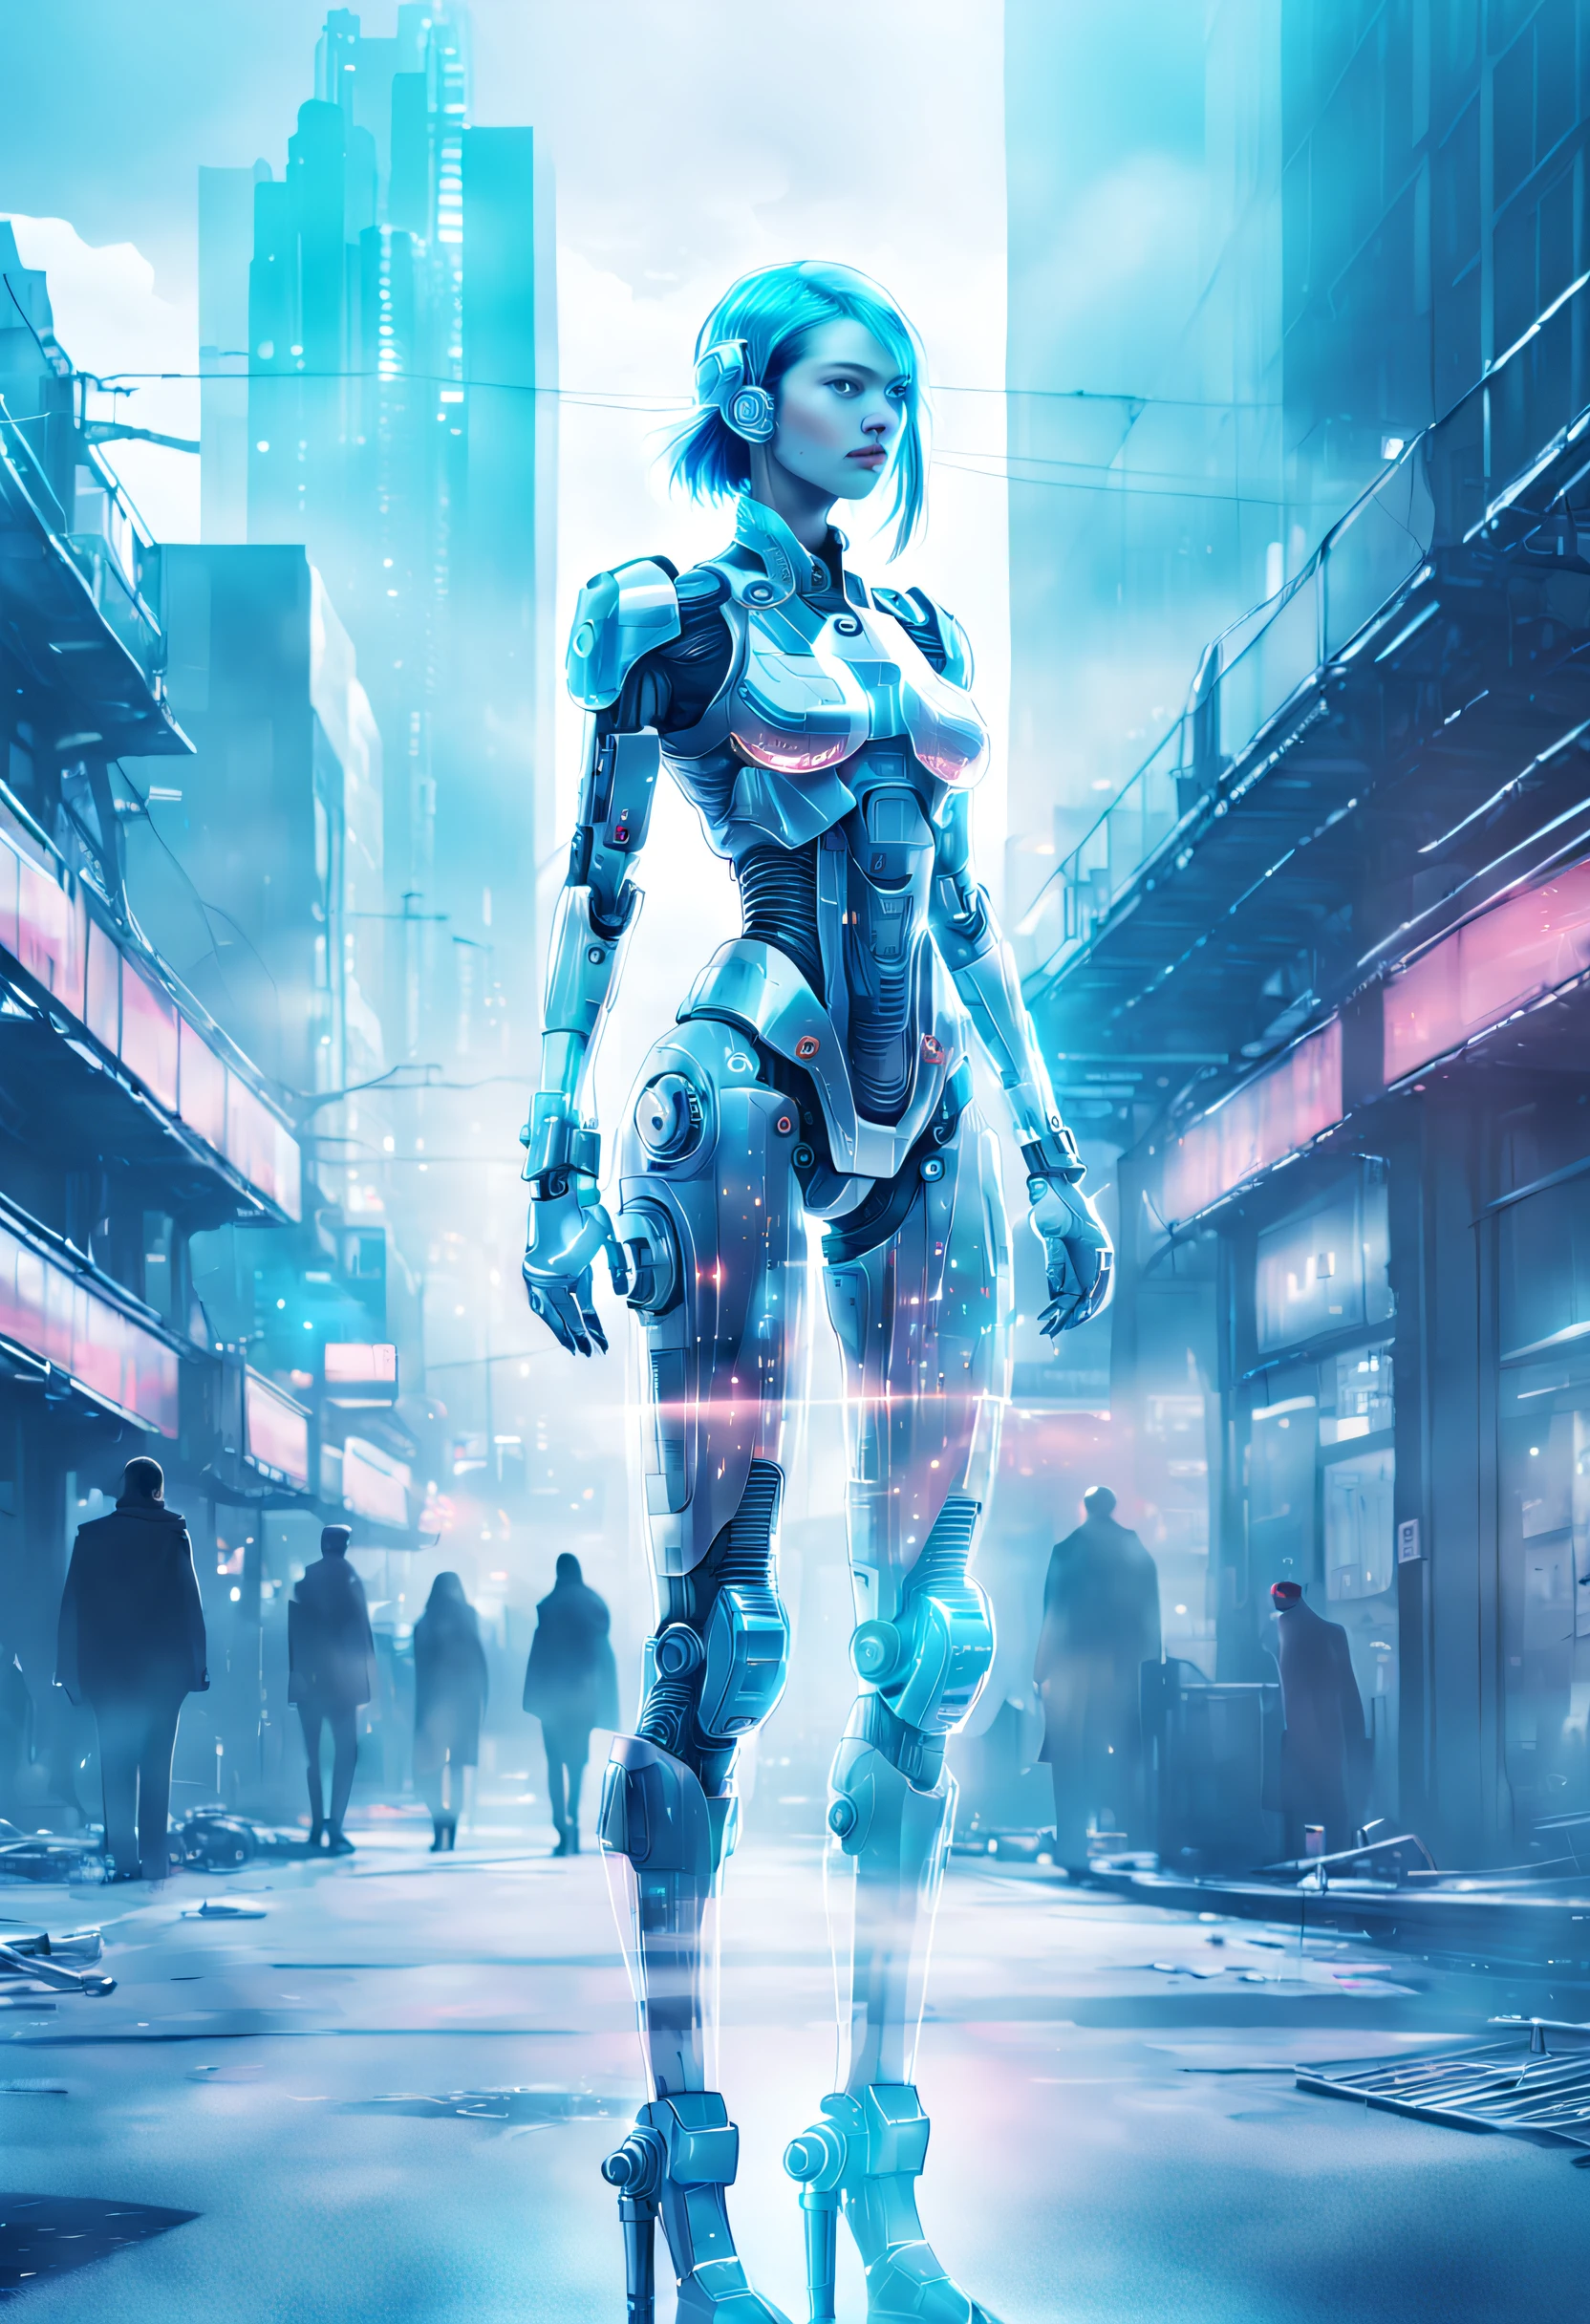 mecha-girl，futuristic urban background，（Doubleexposure：1.8），Complex illustrations in surrealist art style，Surreal dreams，Incognito as a virtual hologram person，Transparent people